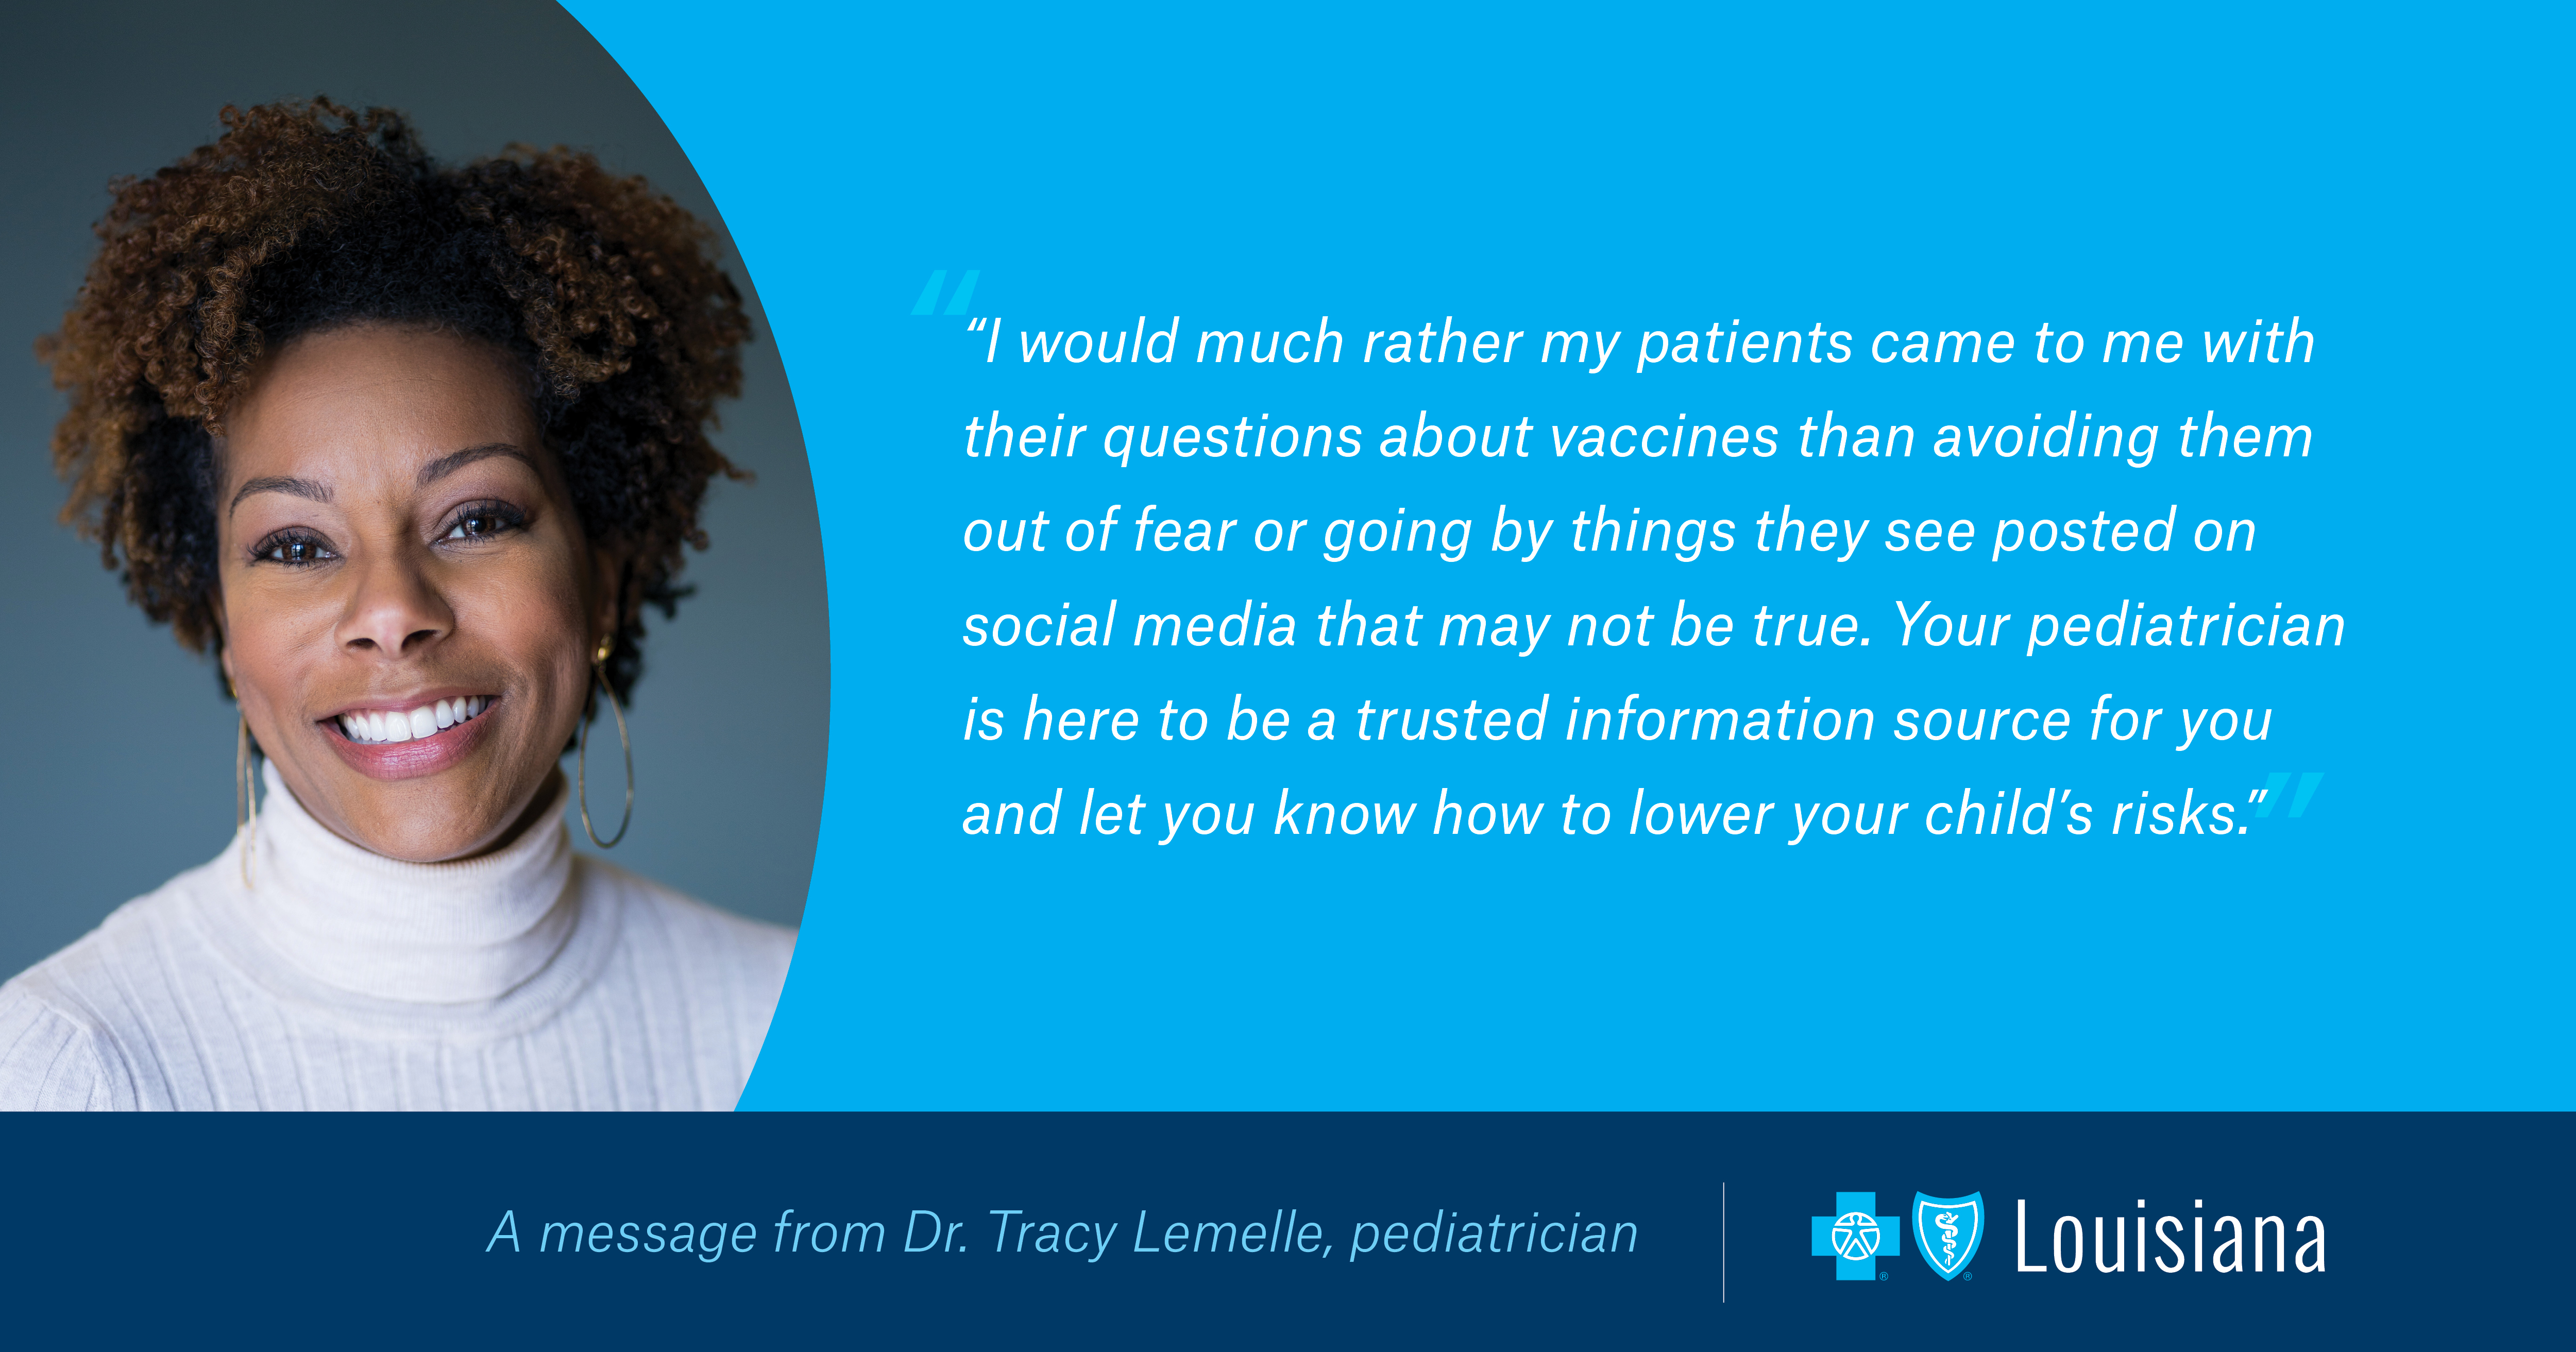 This is a photo of Dr. Tracy Lemelle, along with a quote from this press release.